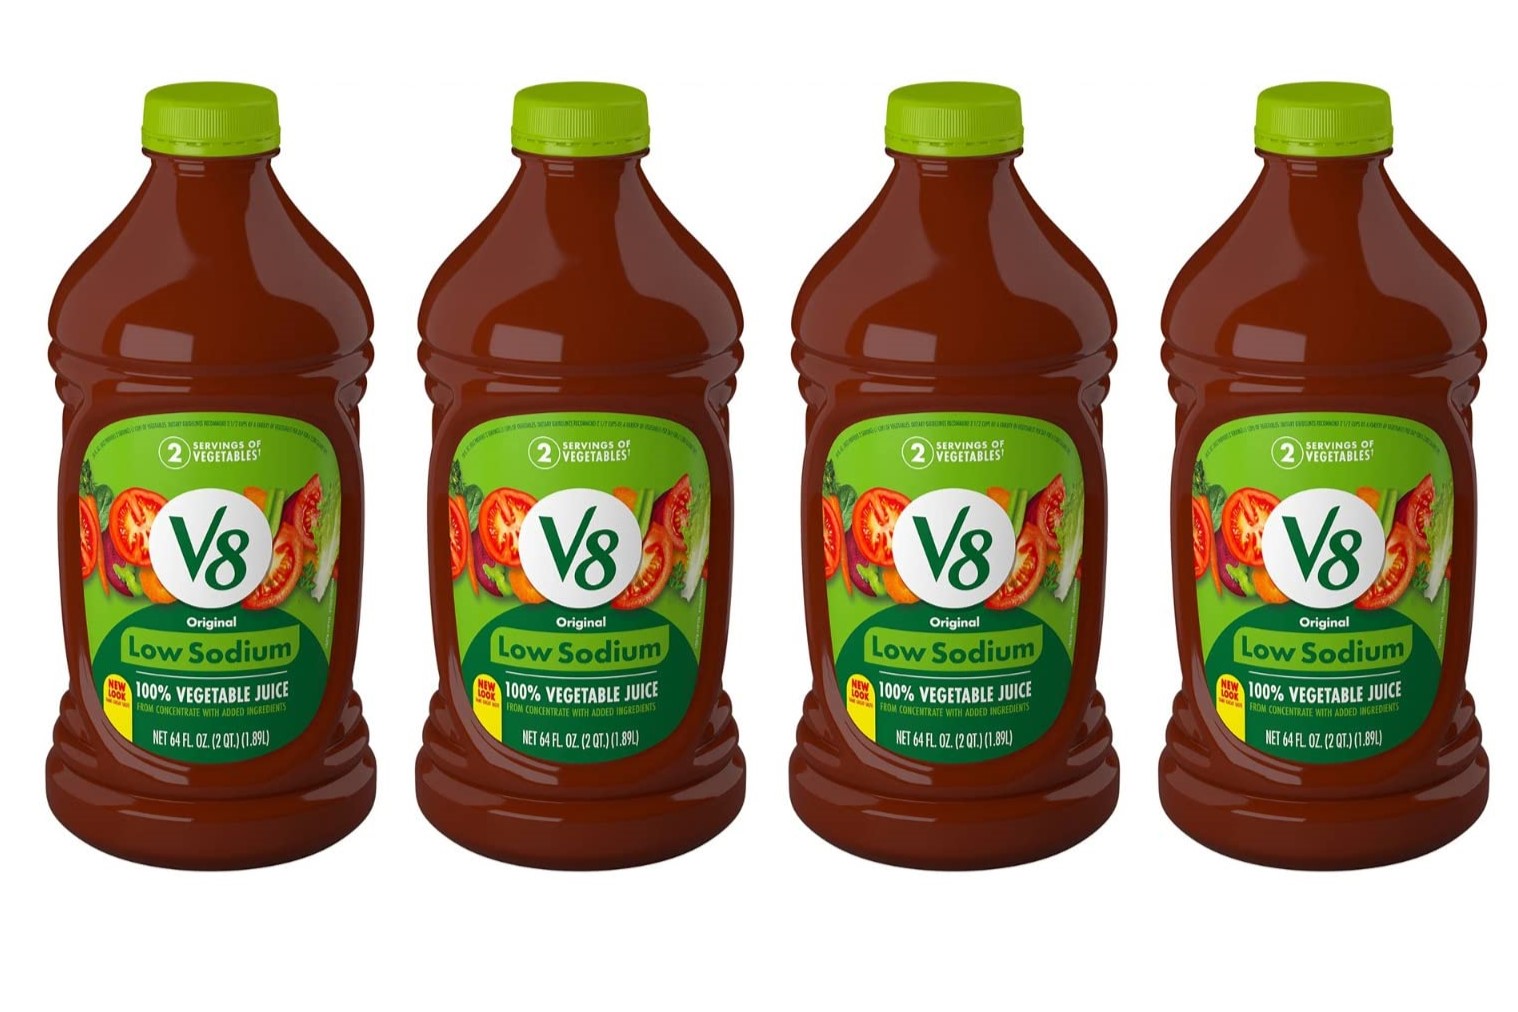 20-v8-low-sodium-juice-nutrition-facts